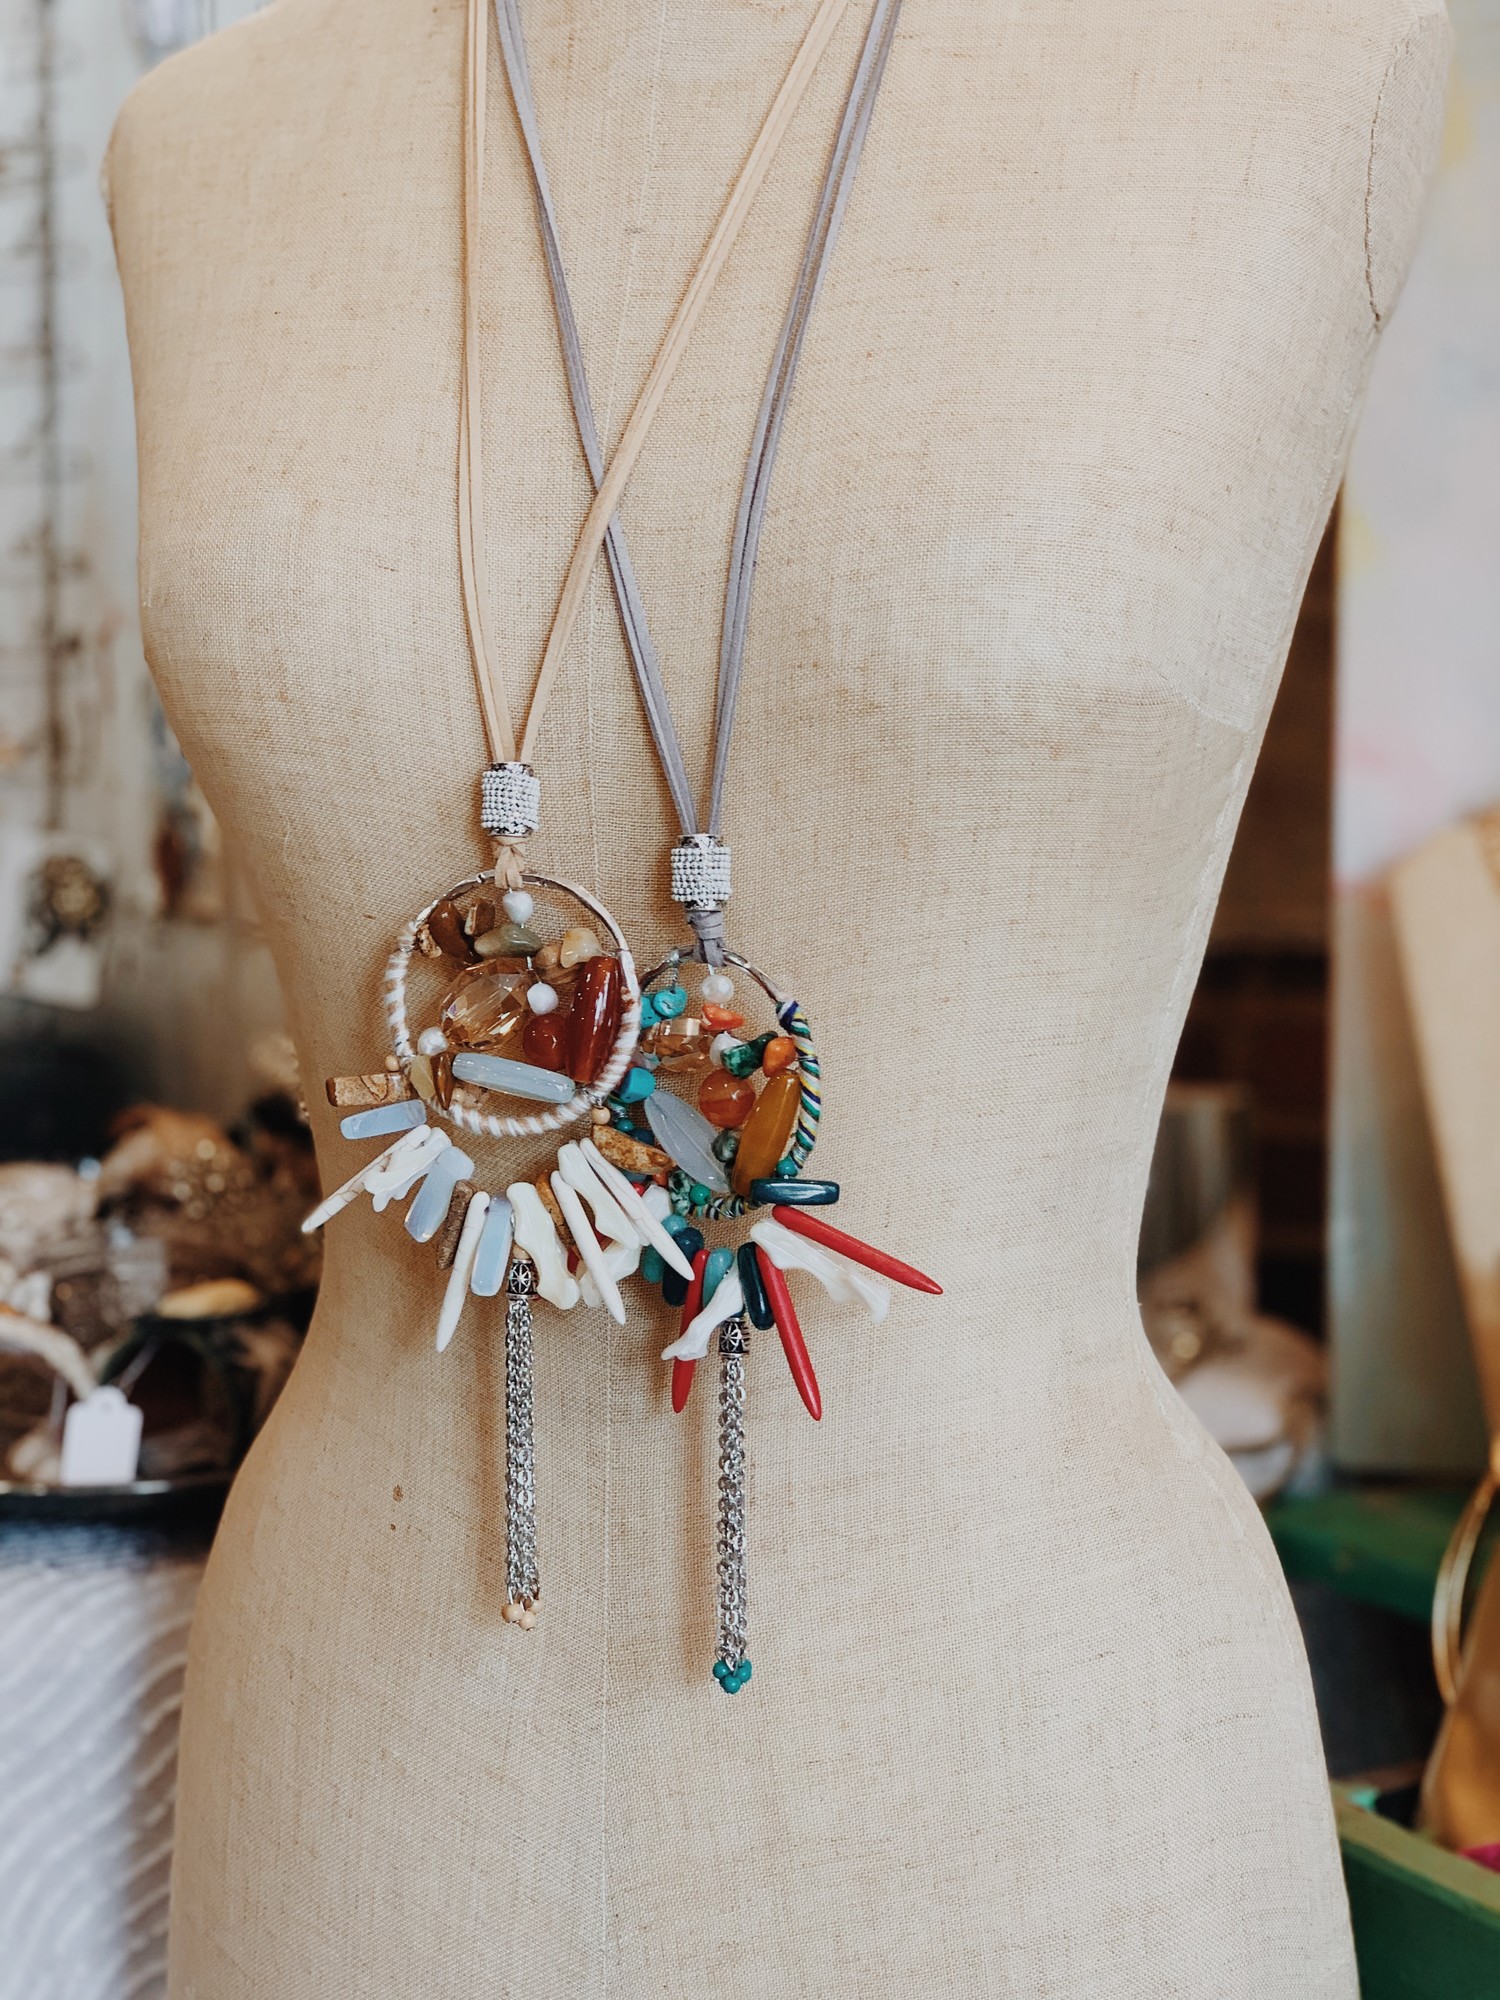 The pendant on this necklace is magnificent! Avalible in nuetral brown tones or red and blue!